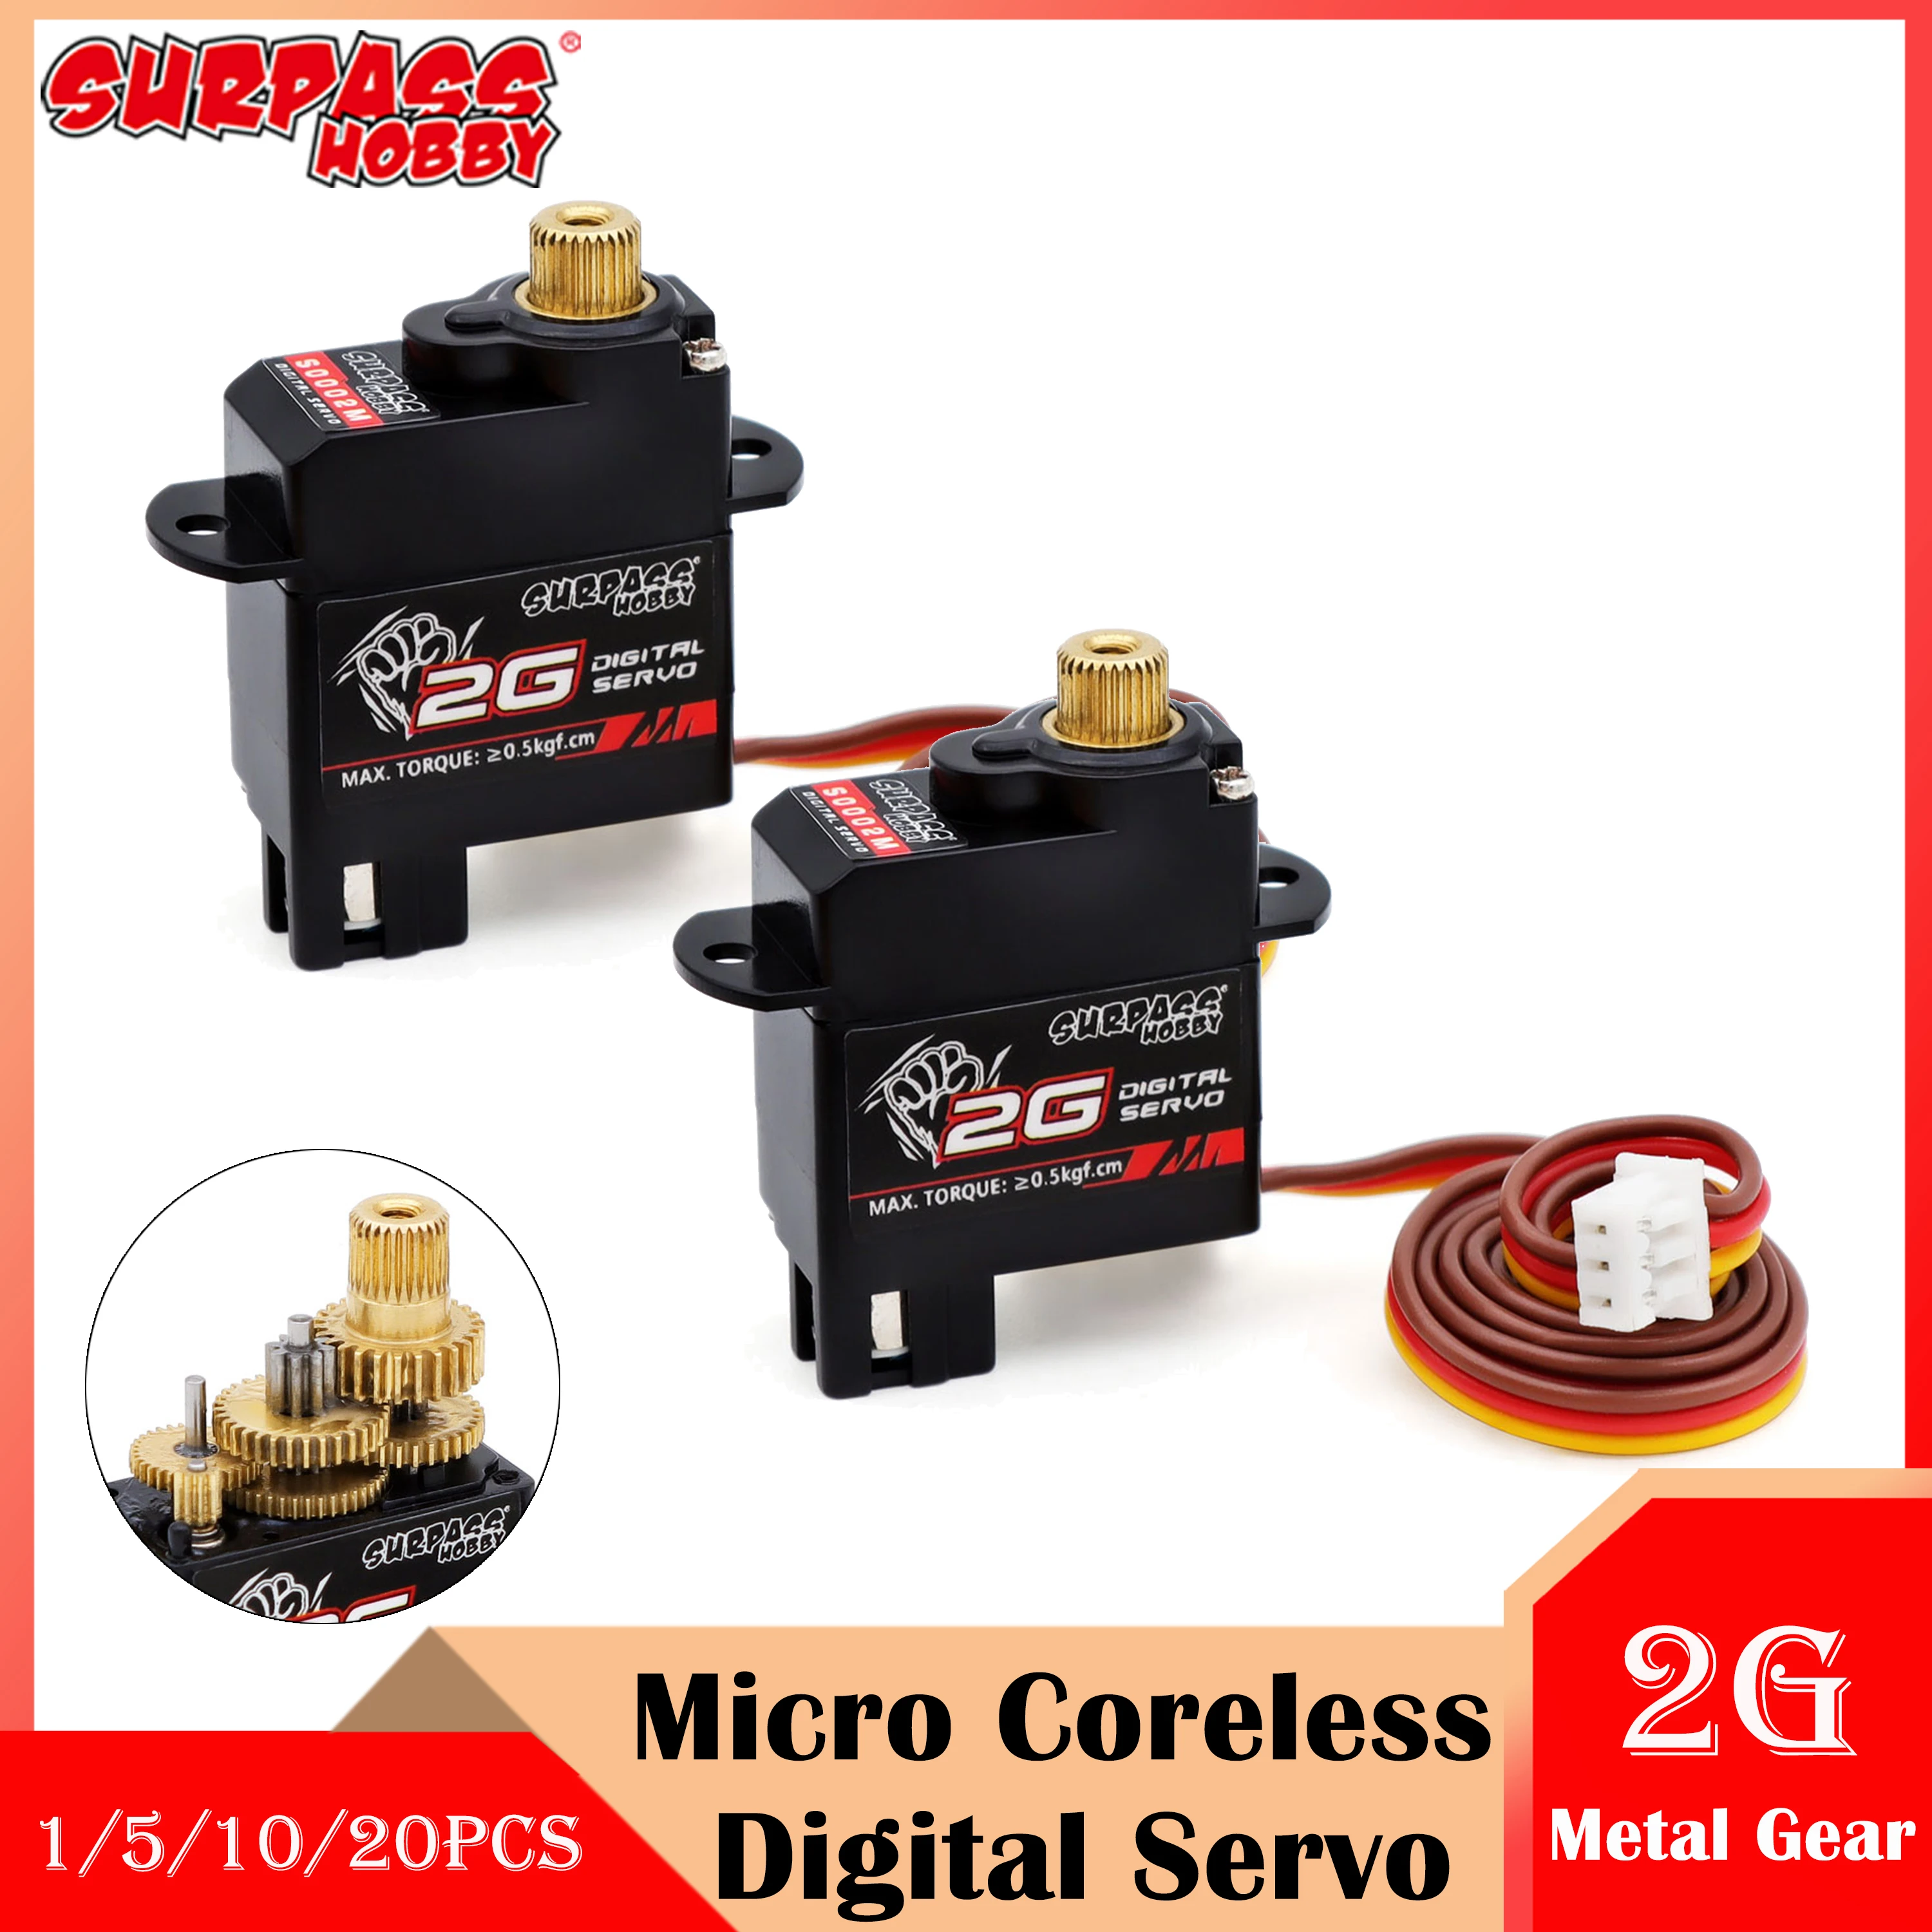 

1/5/10/20PCS Surpass Hobby 2g Micro Digital Servo Metal Gear Mini Coreless Motor for Rc Car Airplane Boat Fixed-wing Helicopter